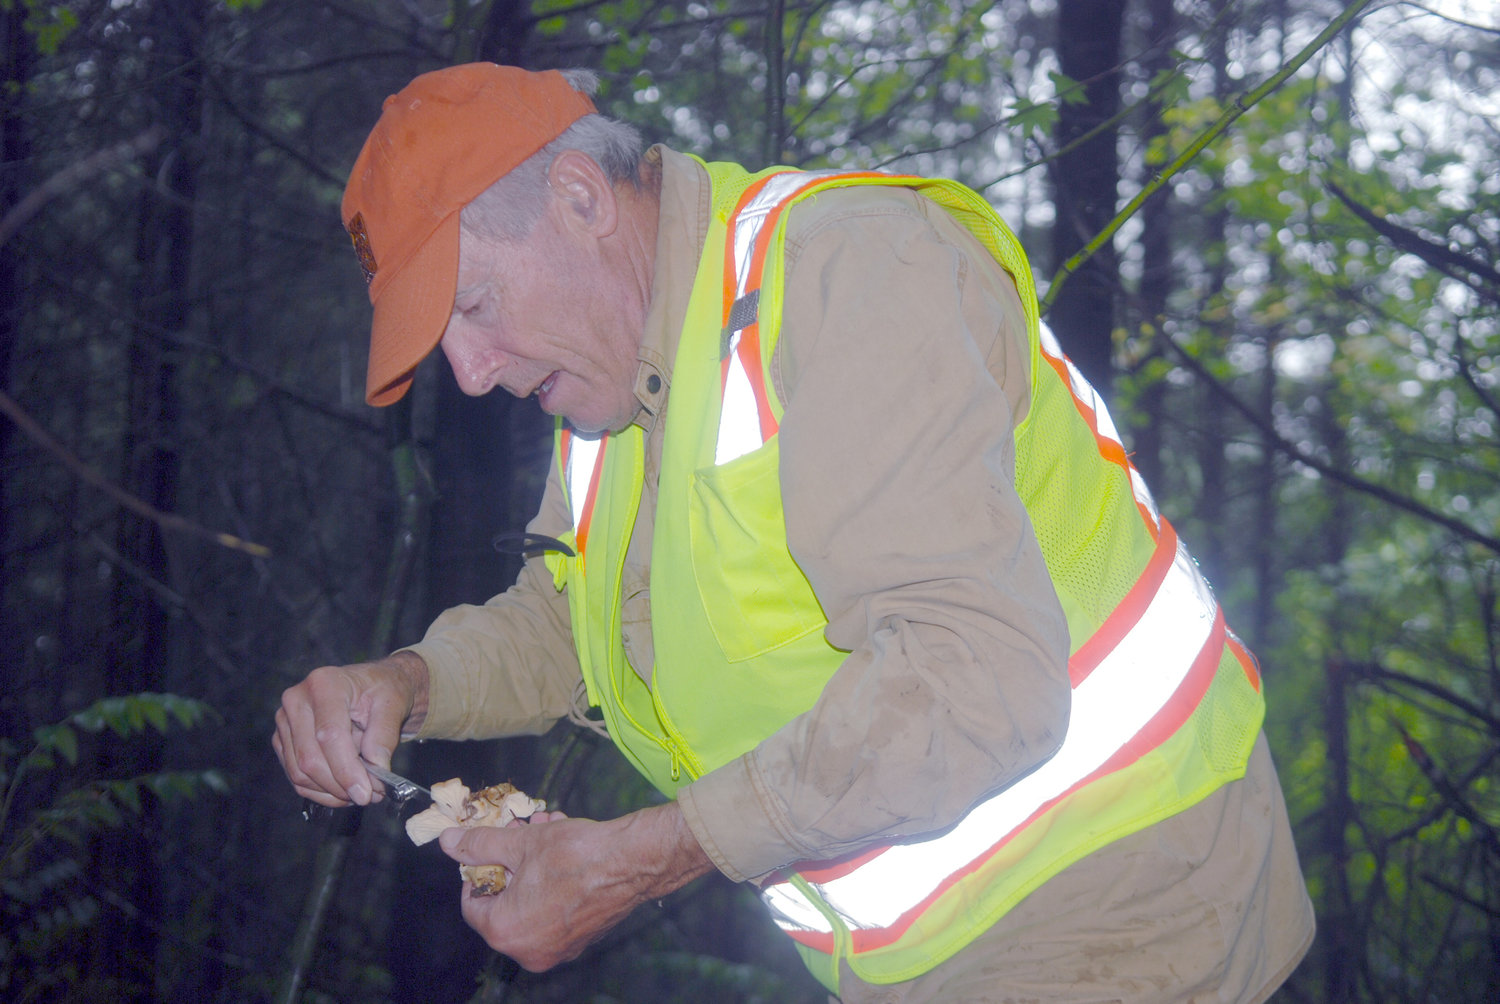 Jim Byrd of Winlock cleans and inspects a white Chanterelle mushroom in a forest near Winlock.